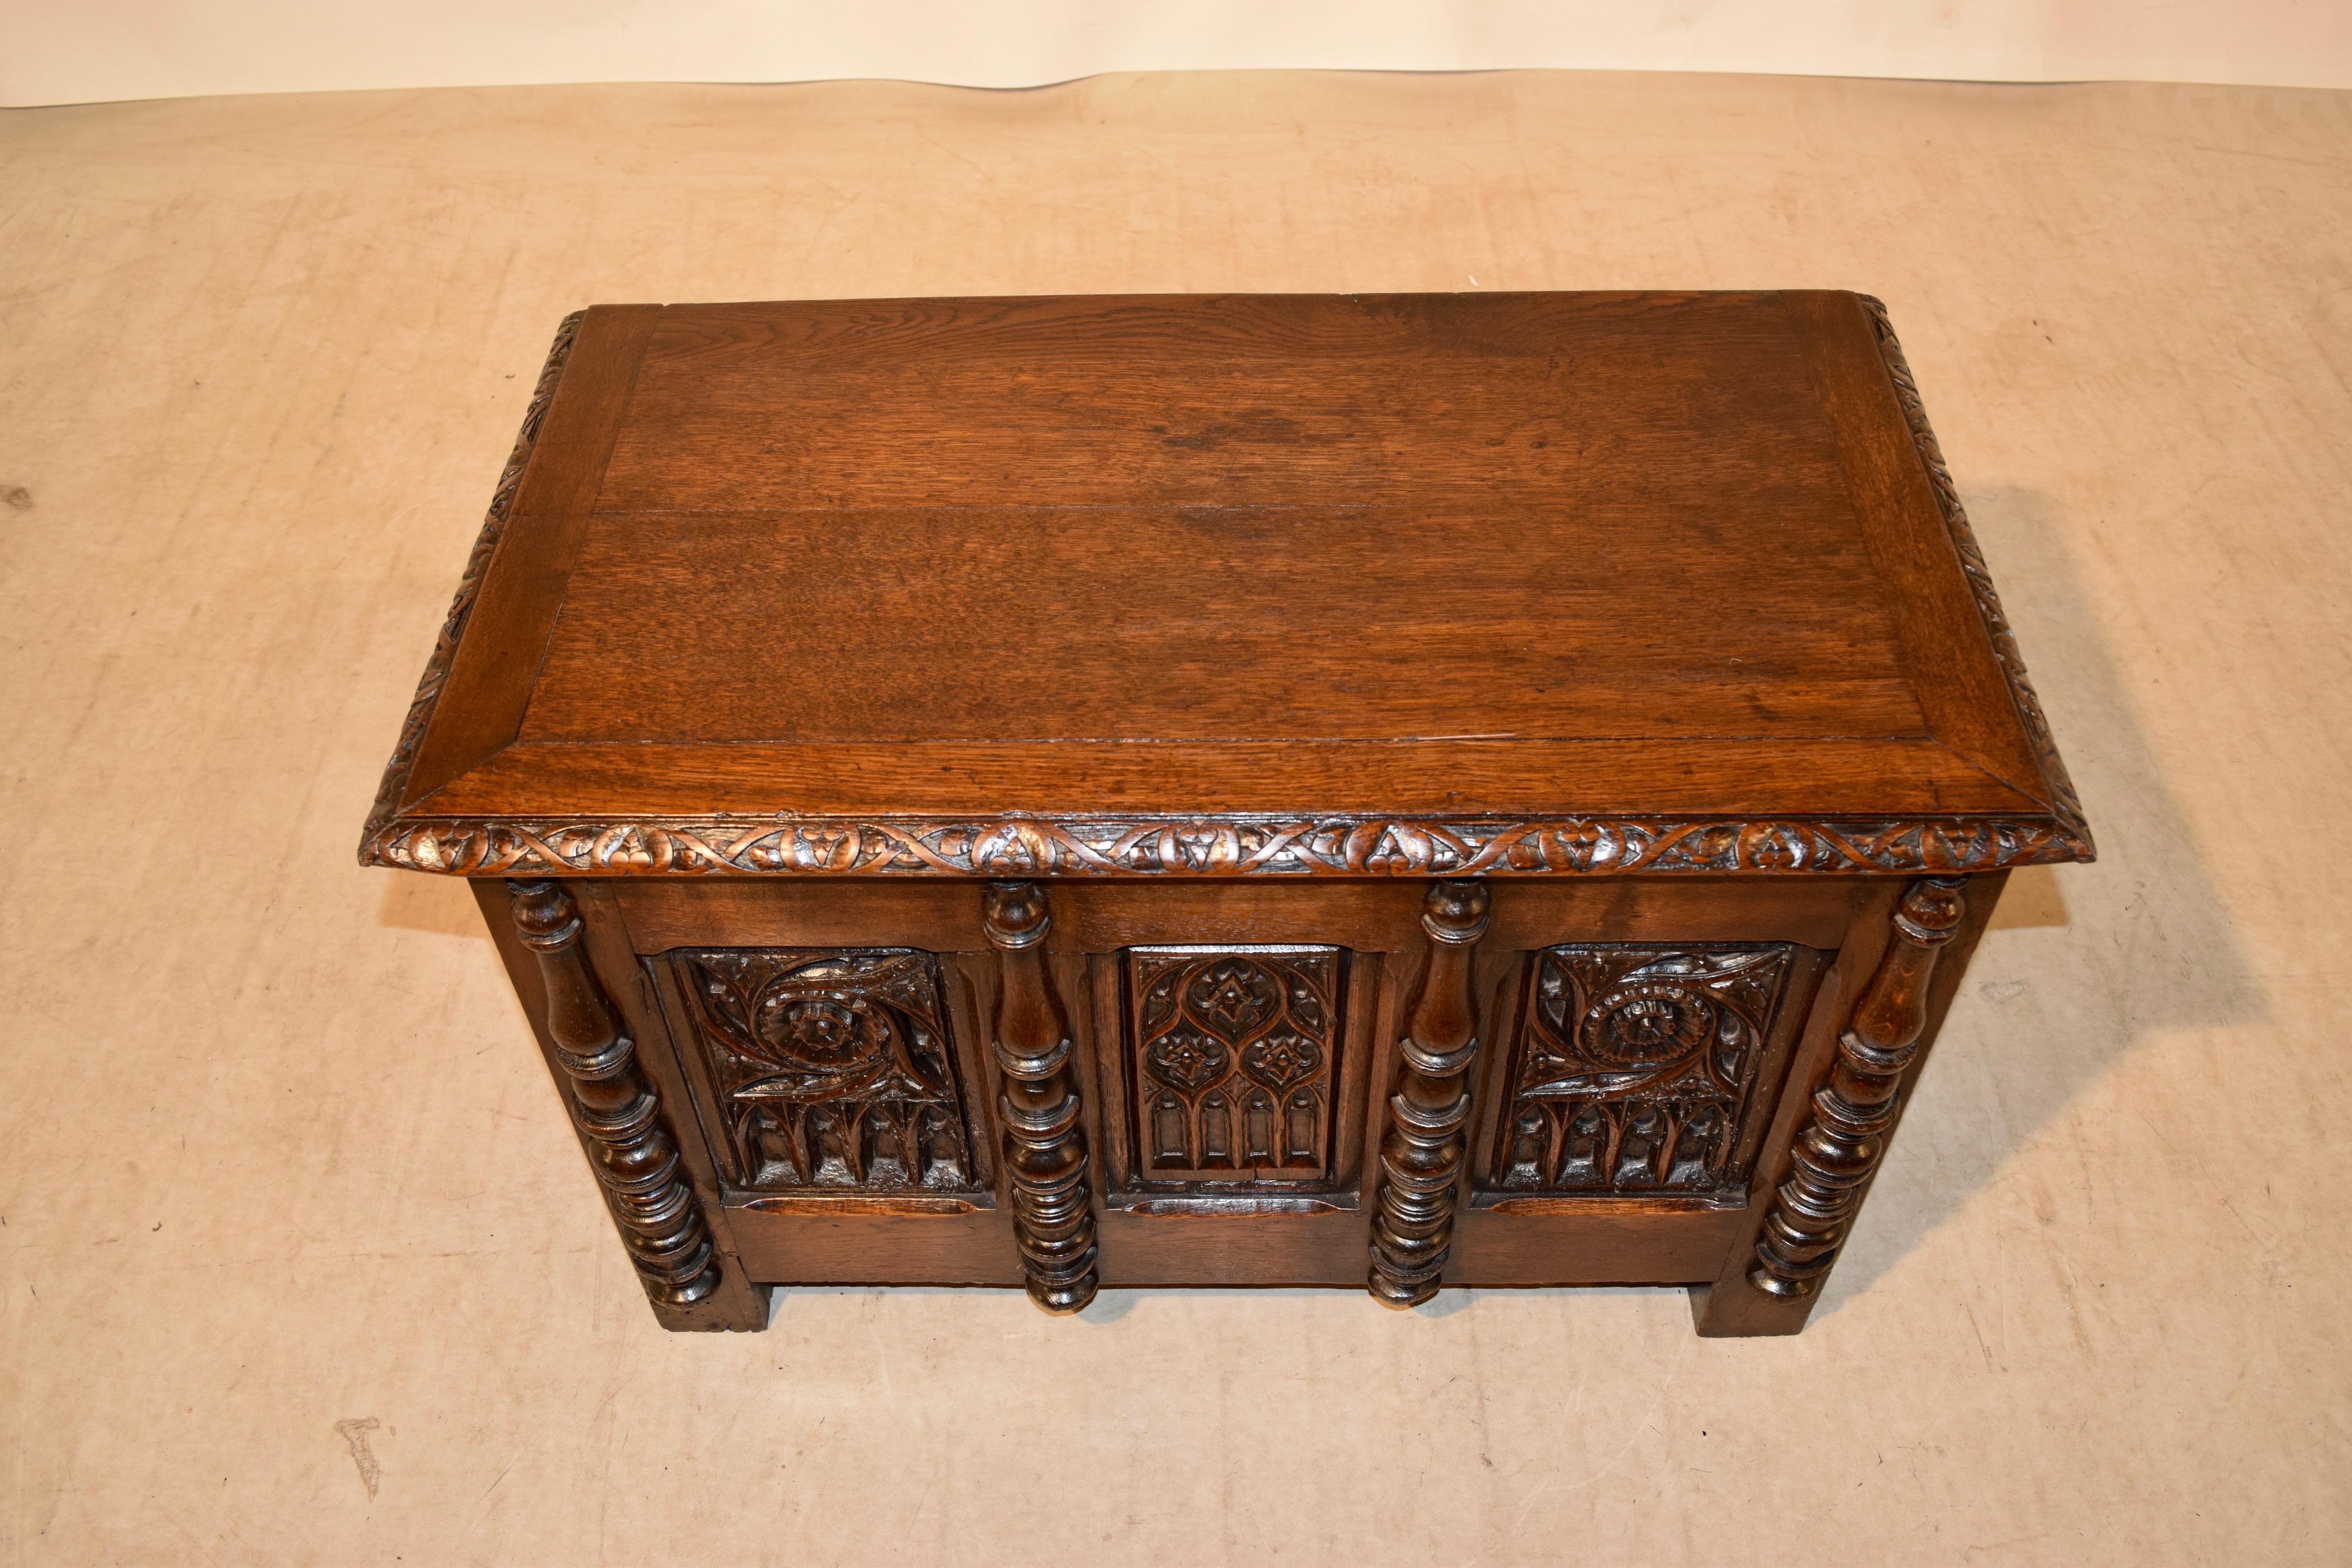 Hand-Carved 19th Century Small Blanket Chest